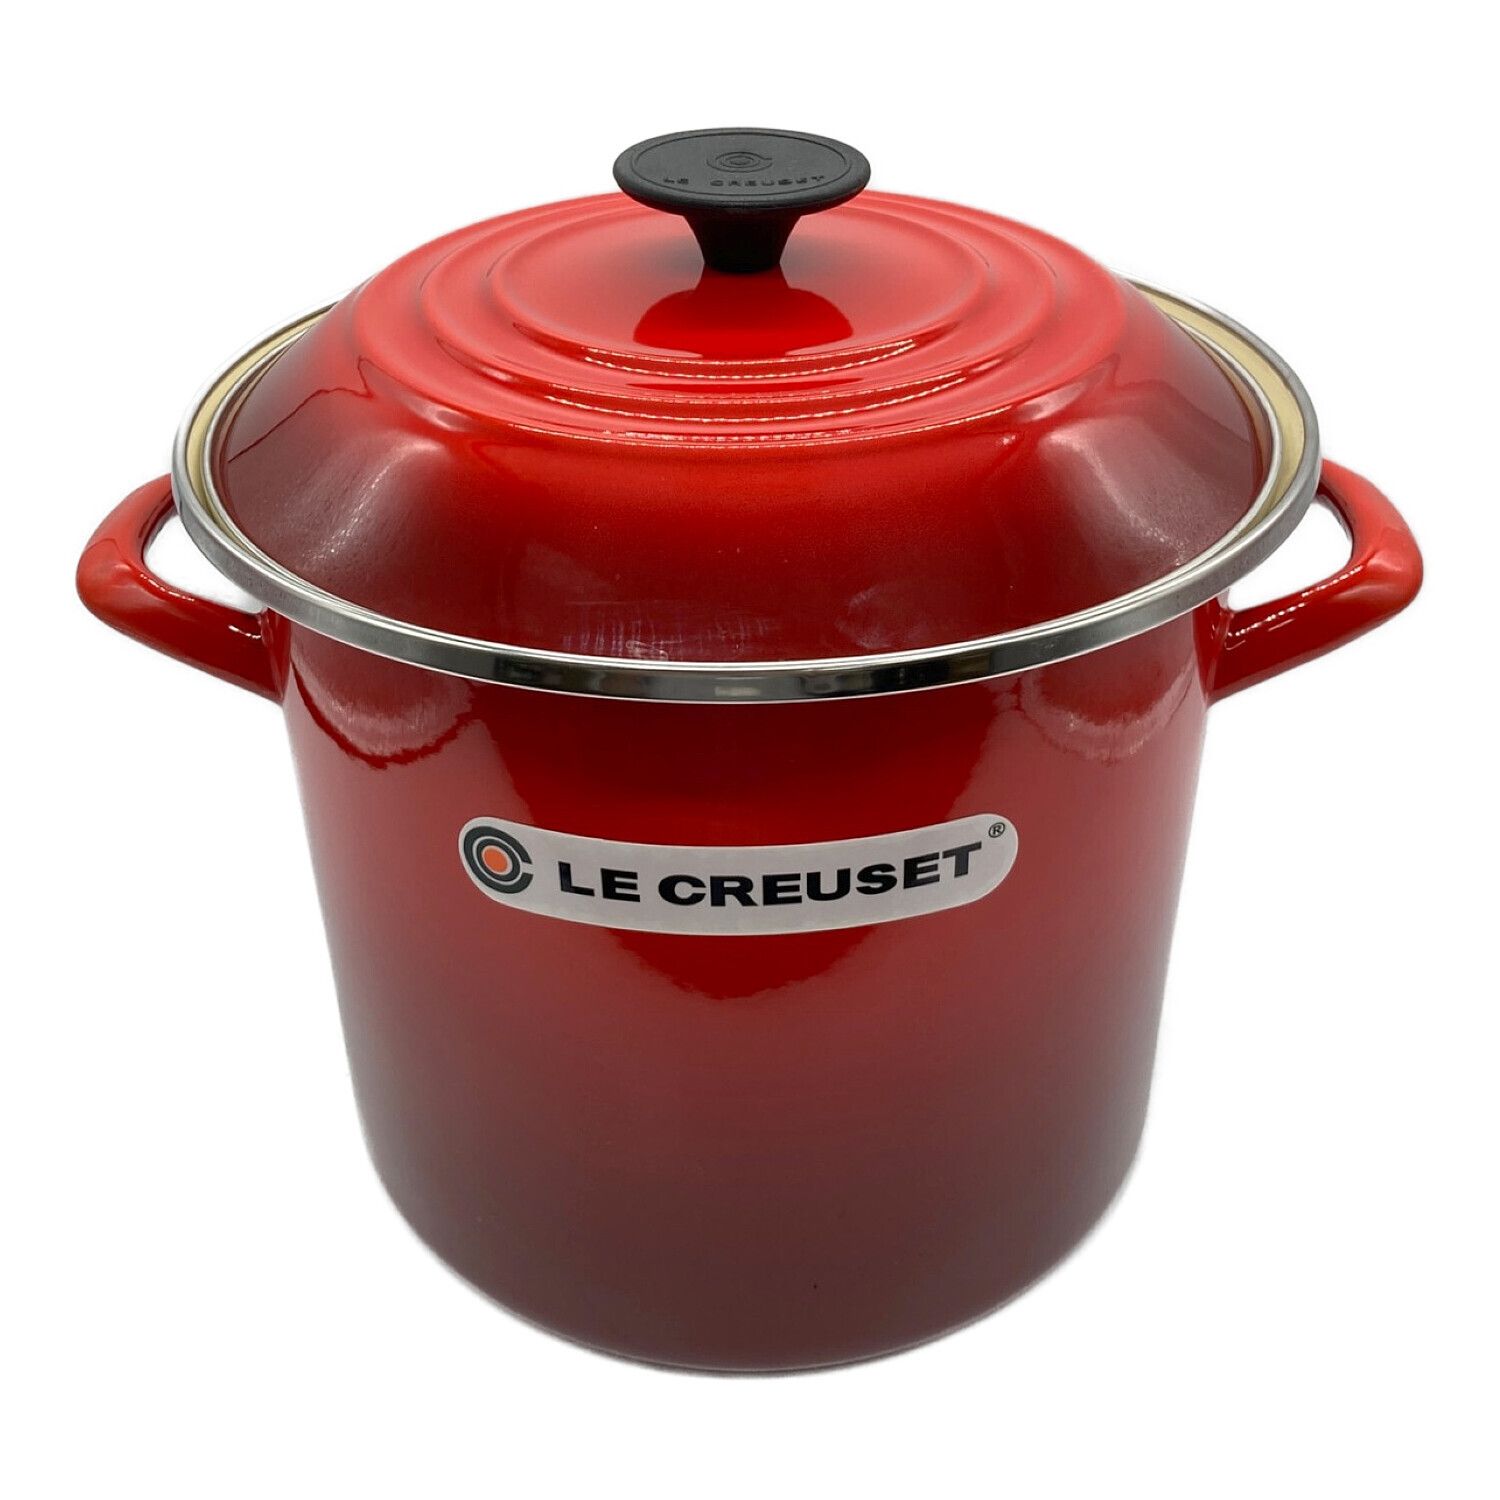 LE CREUSET (ルクルーゼ) 両手鍋 レッド ストックポット｜トレファクONLINE